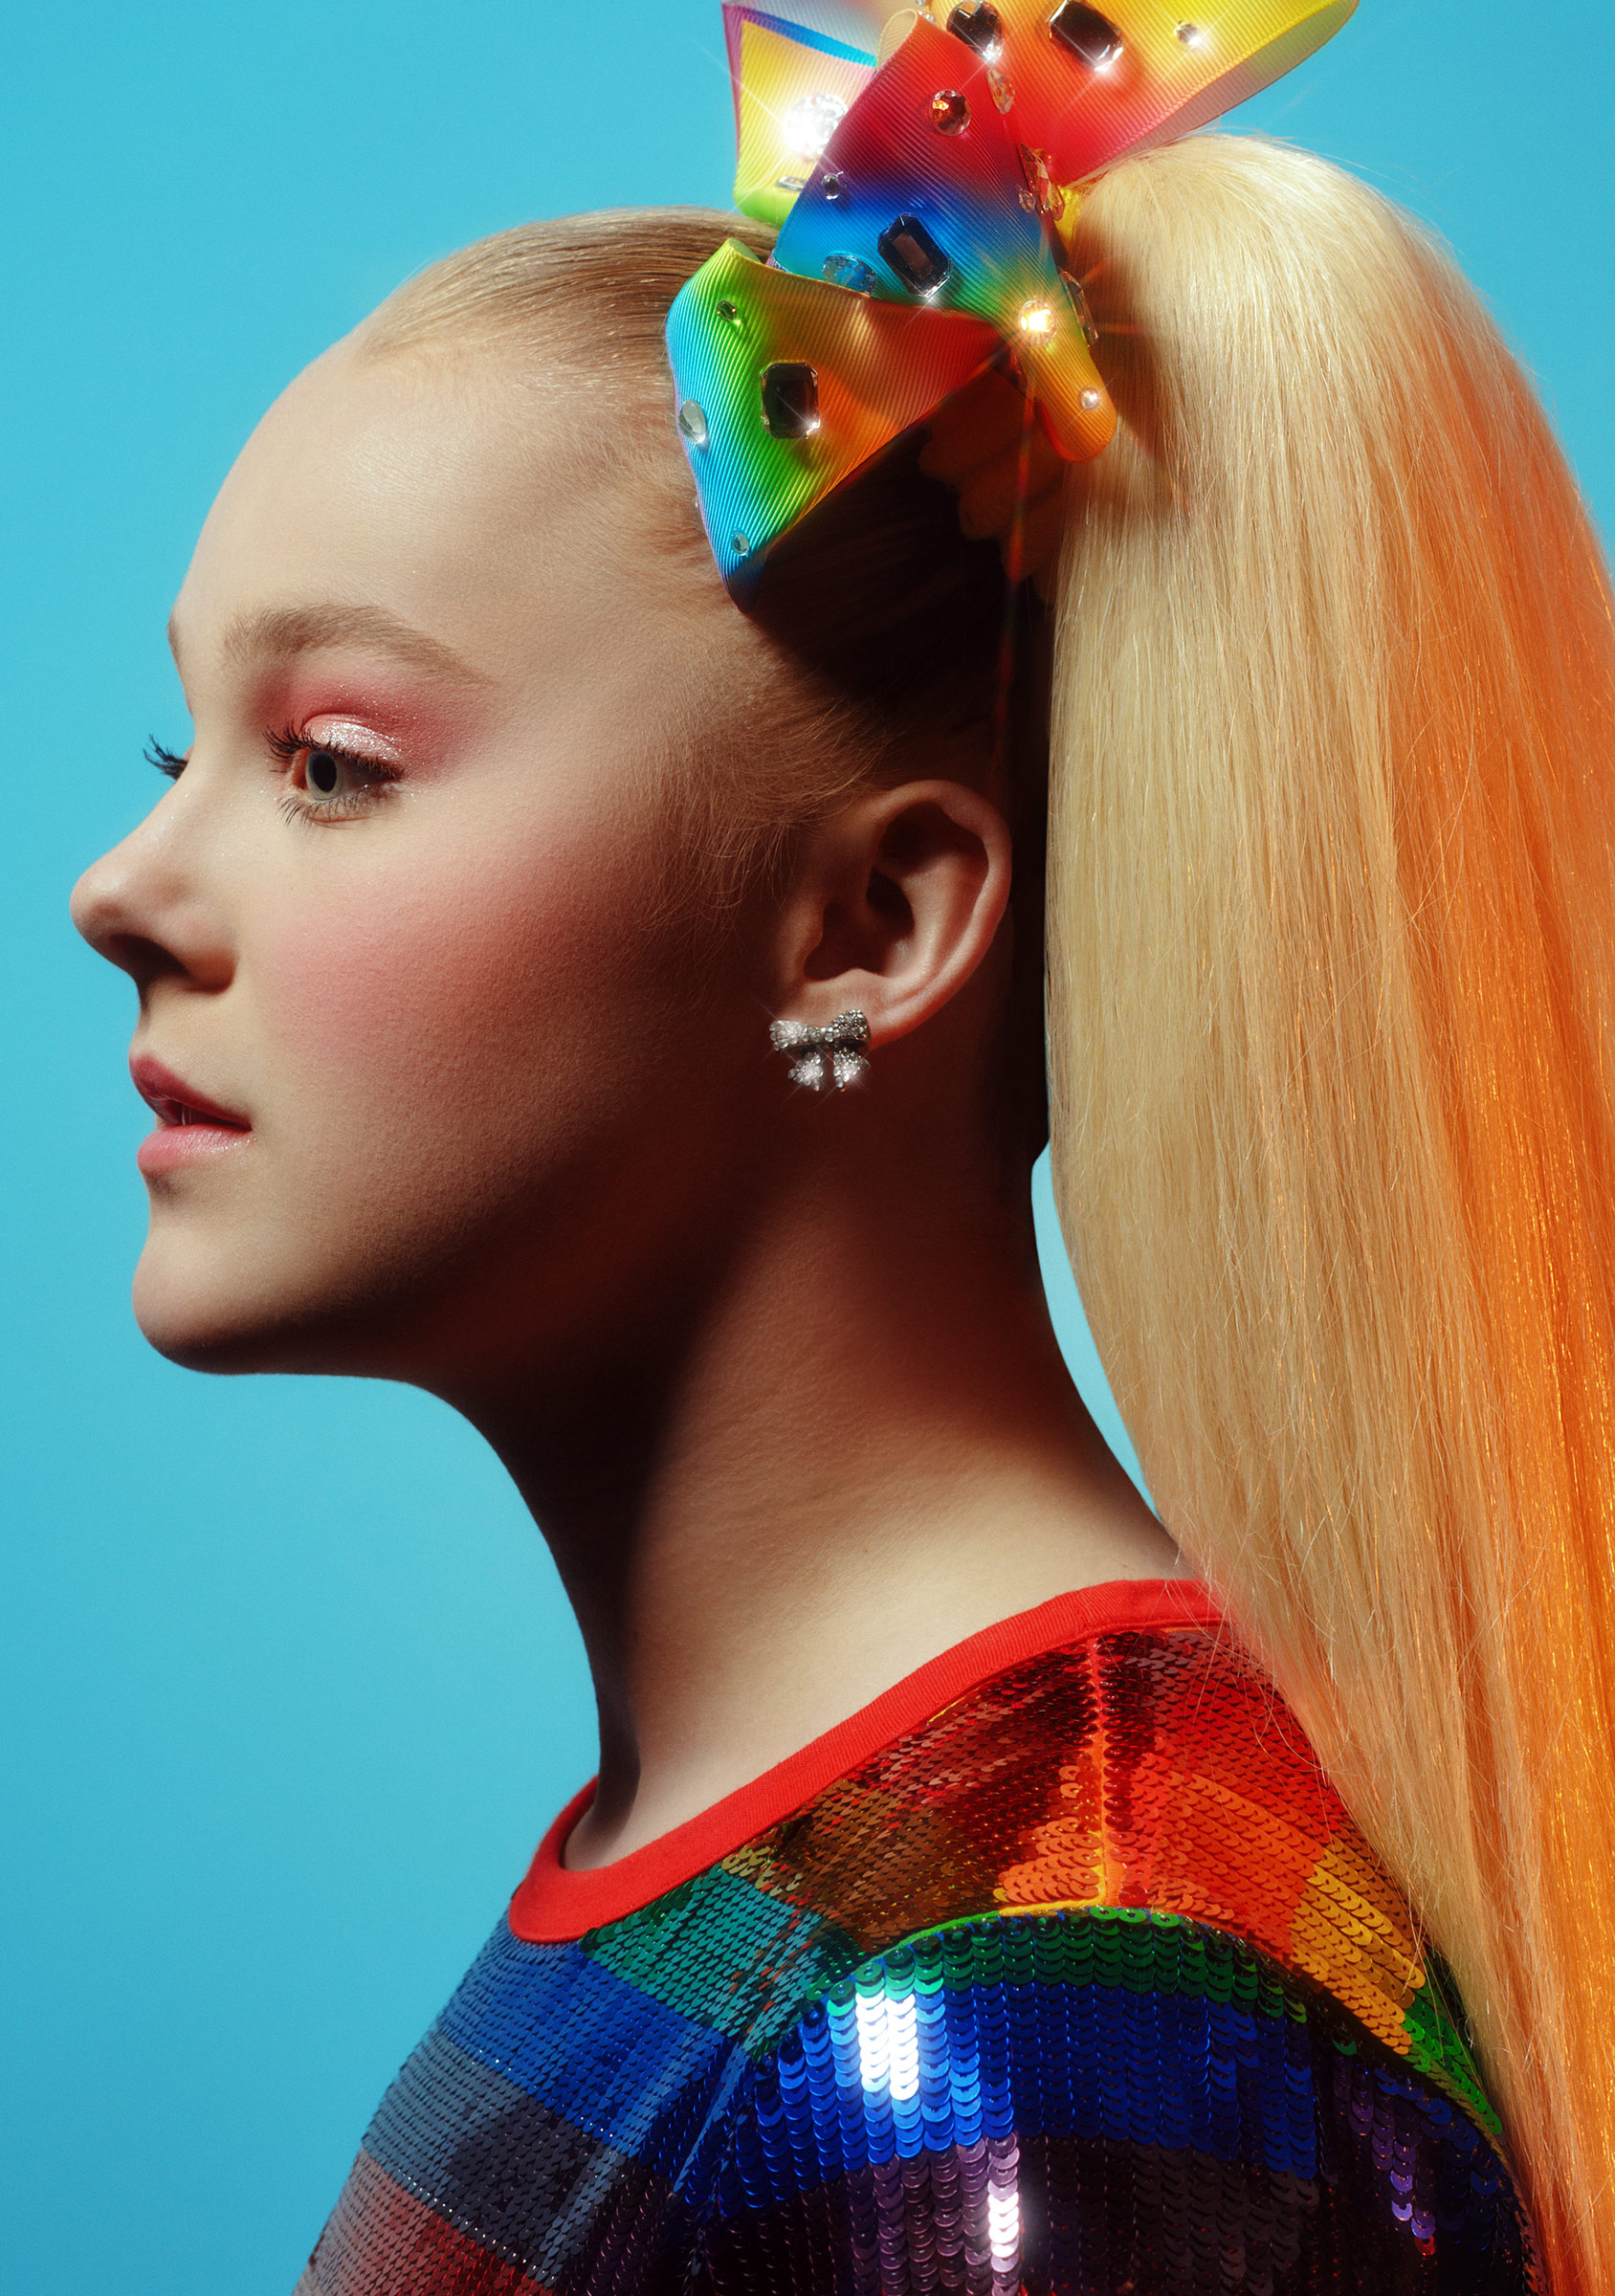 JoJo Siwa began her rise to fame around 2015 on the Lifetime reality TV series Dance Moms. (Charlotte Rutherford for TIME)